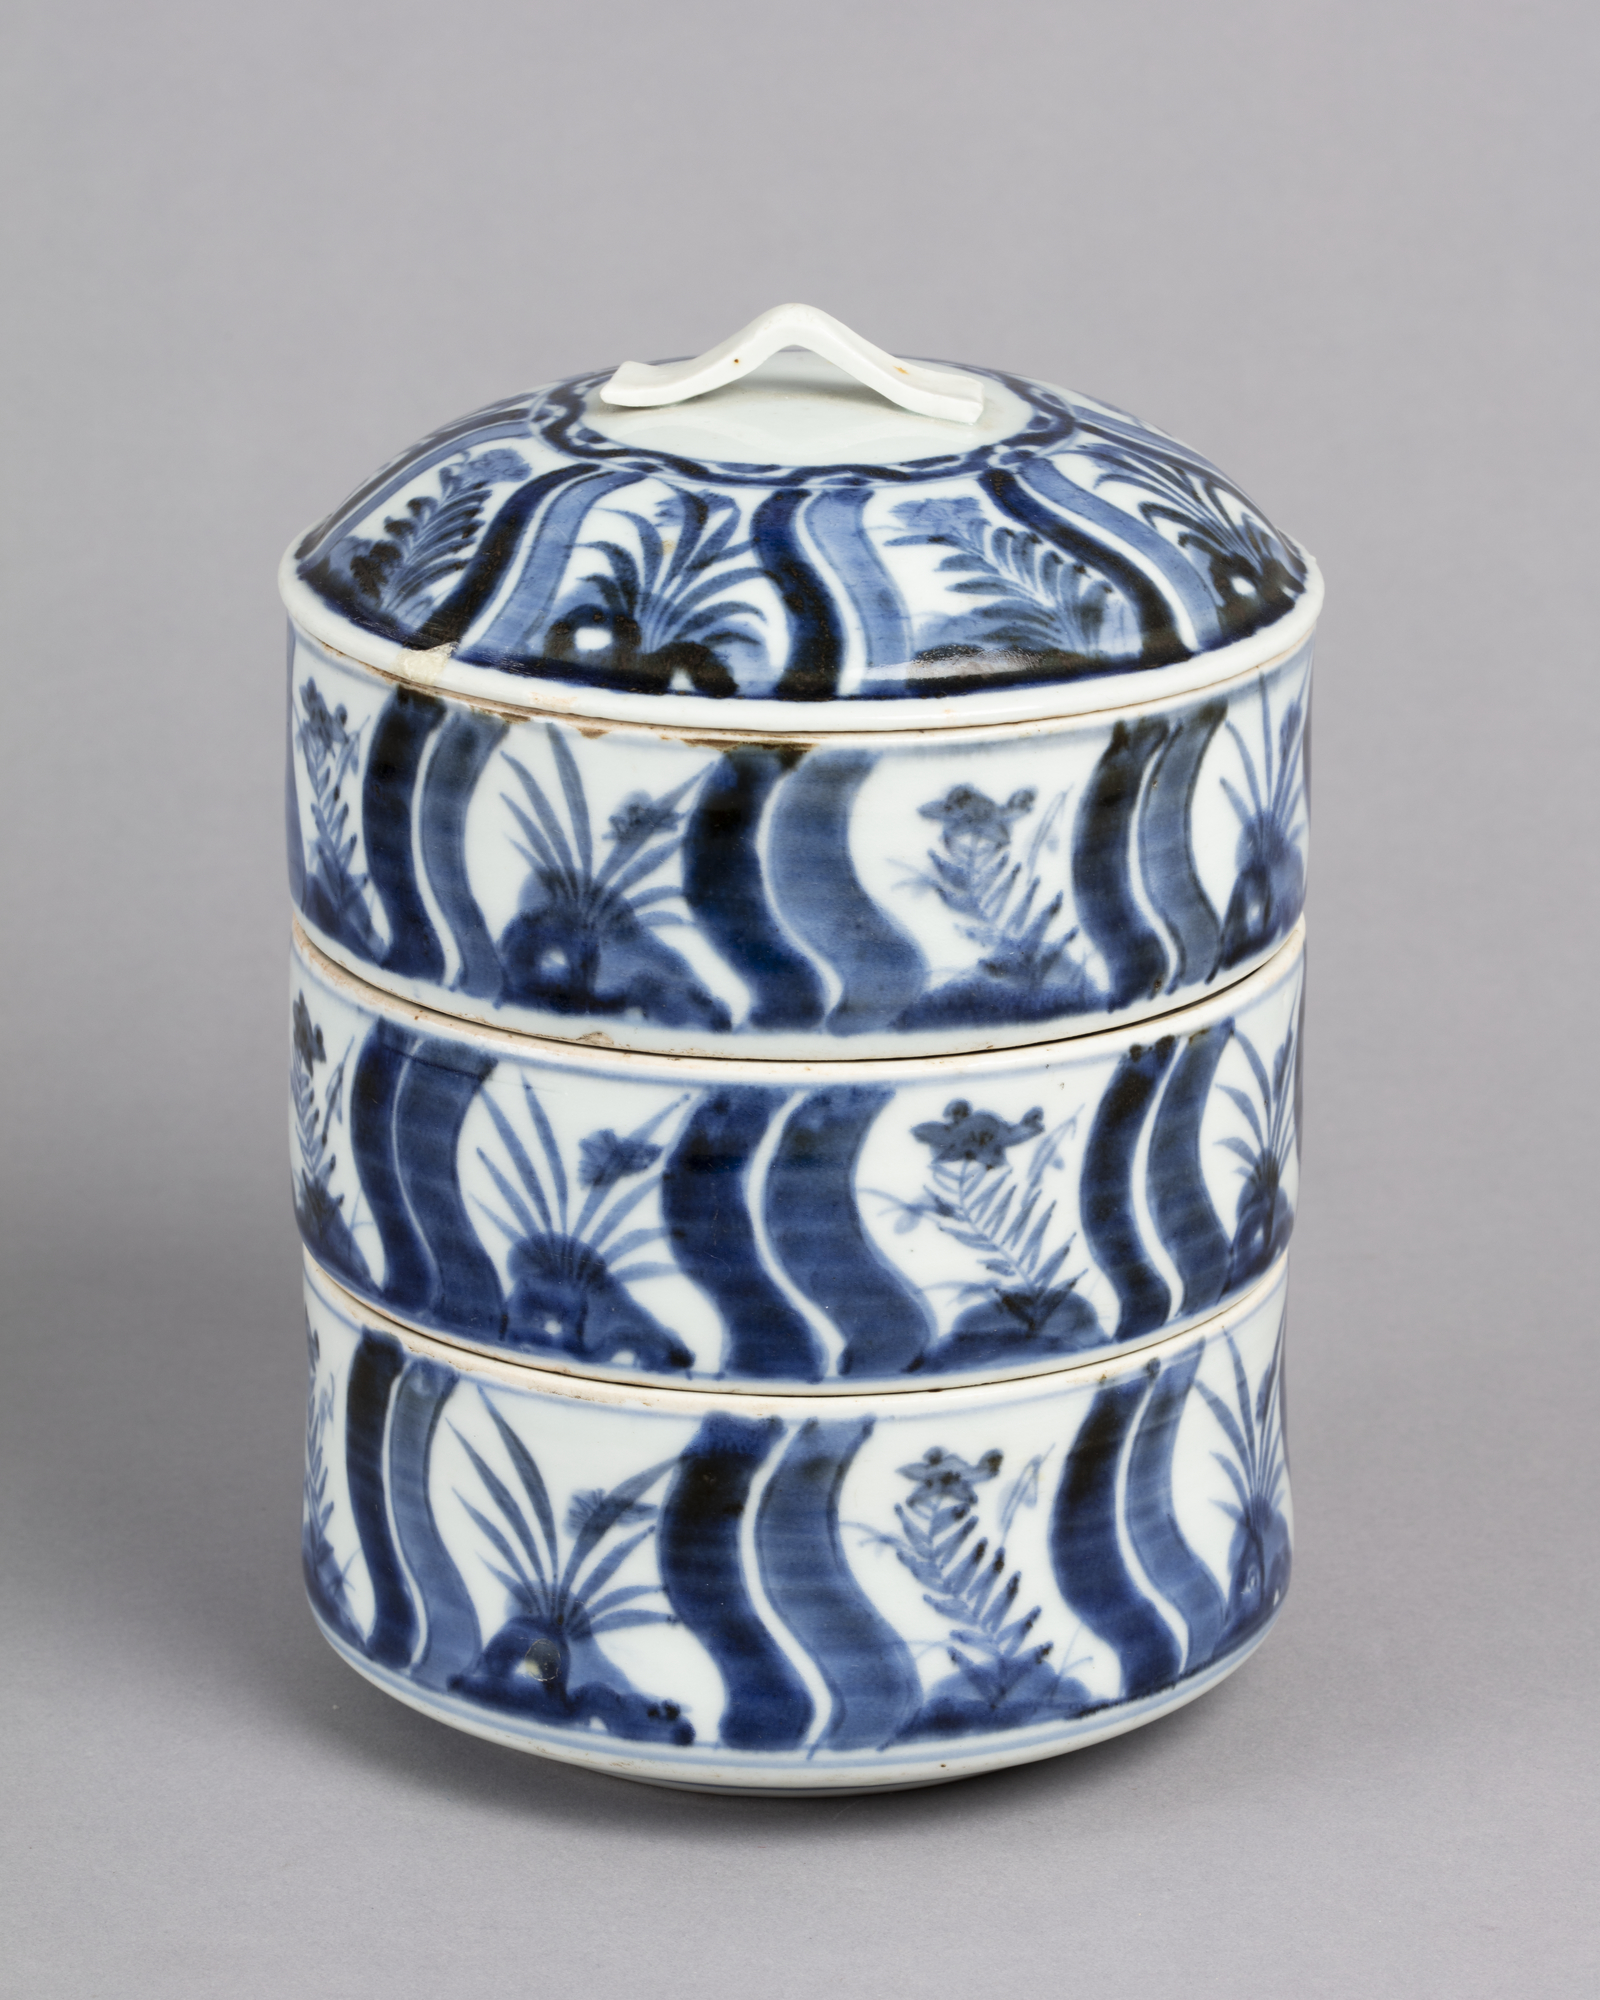 Tiered lidded box with design of rocks and flowers in blue on white